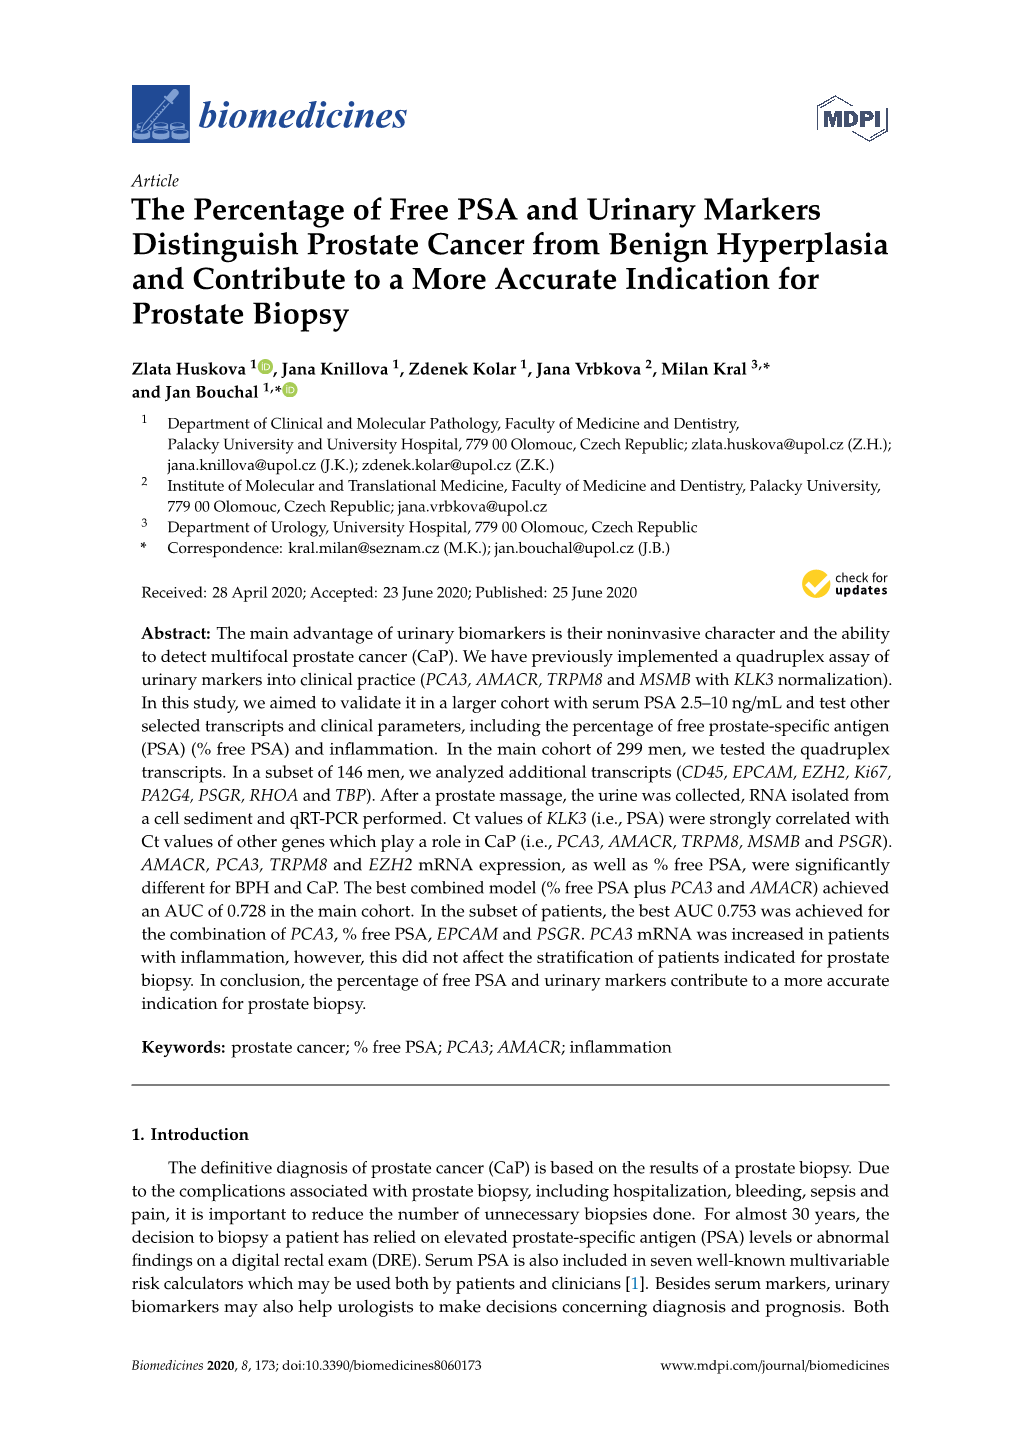 The Percentage of Free PSA and Urinary Markers Distinguish Prostate Cancer from Benign Hyperplasia and Contribute to a More Accurate Indication for Prostate Biopsy